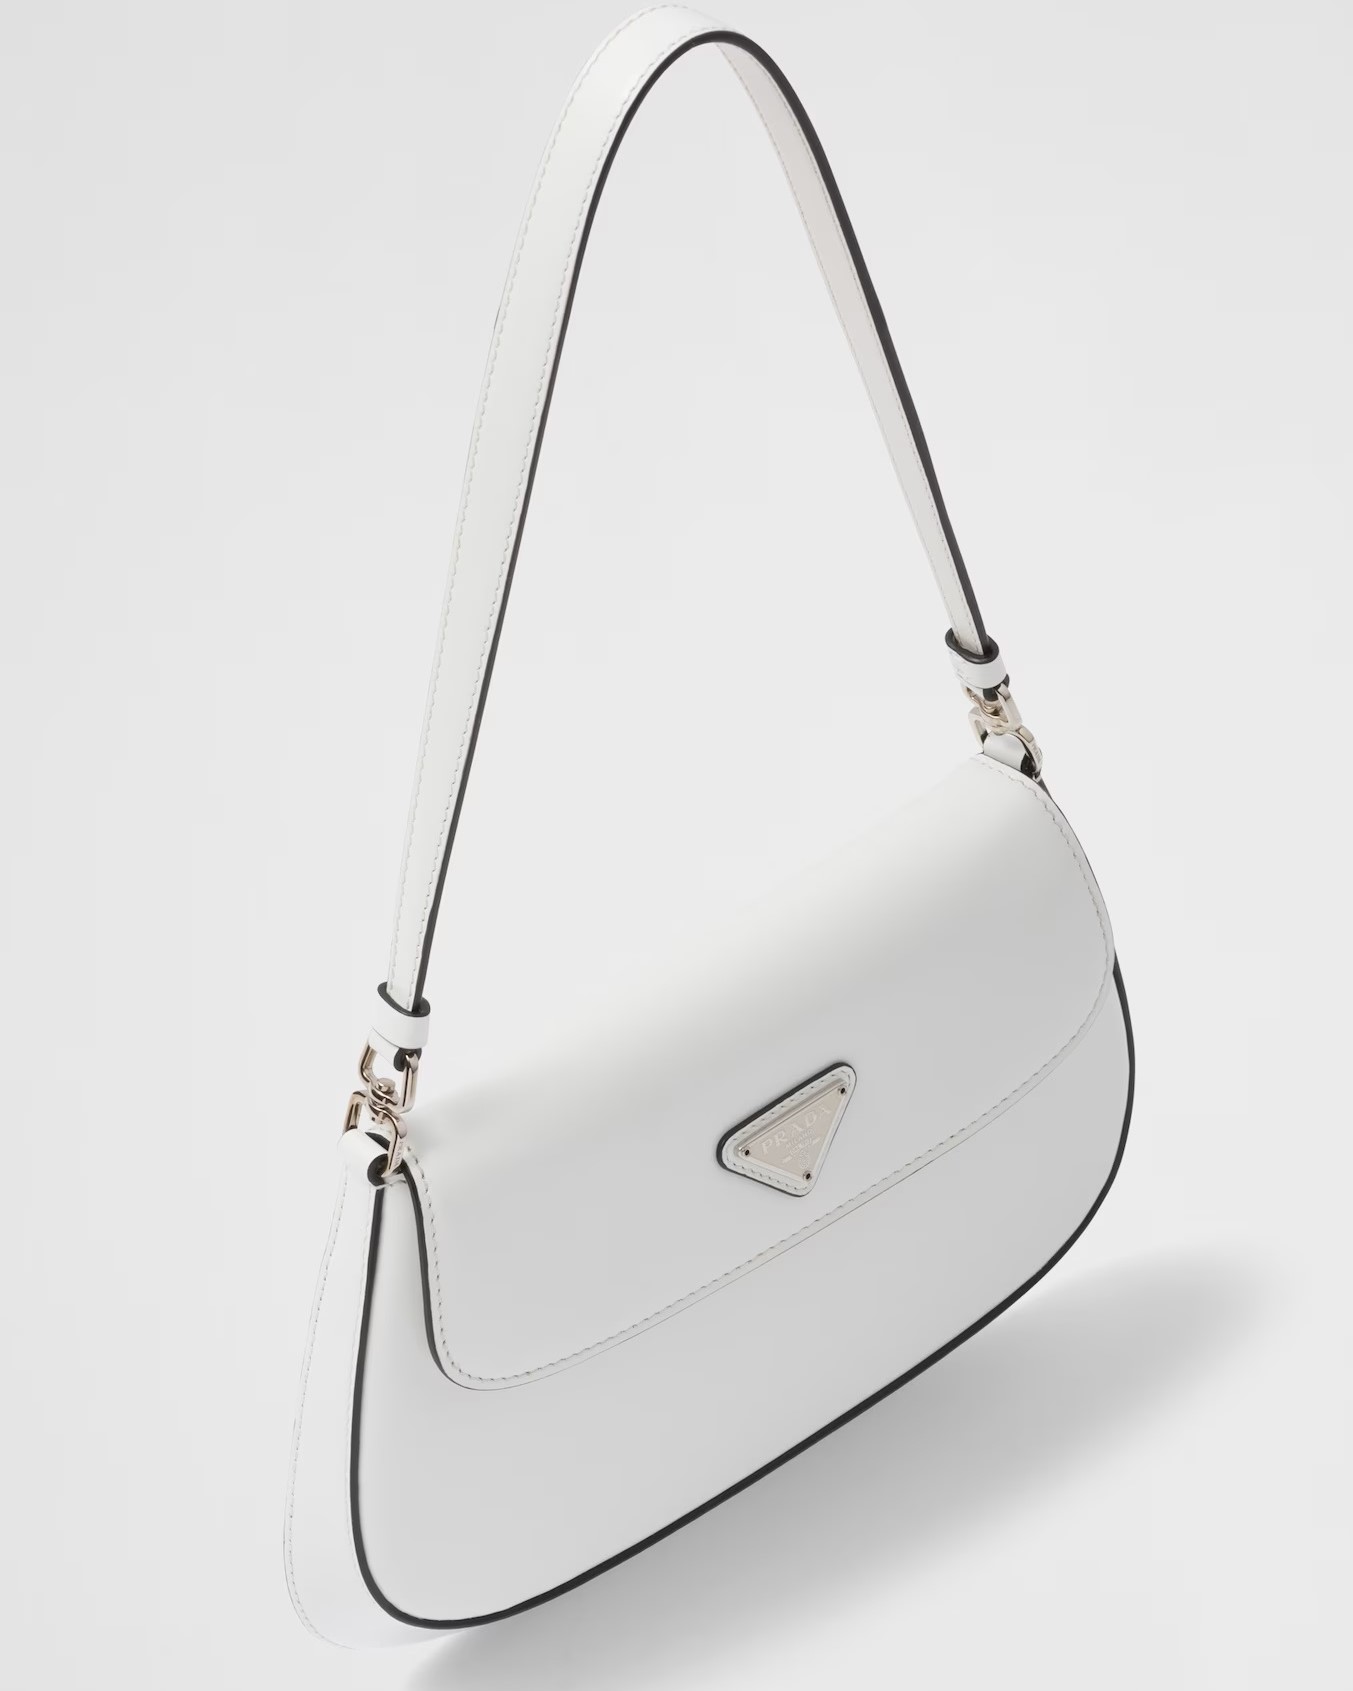 TÚI XÁCH PRADA CLEO BRUSHED LEATHER SHOULDER BAG WITH FLAP 5